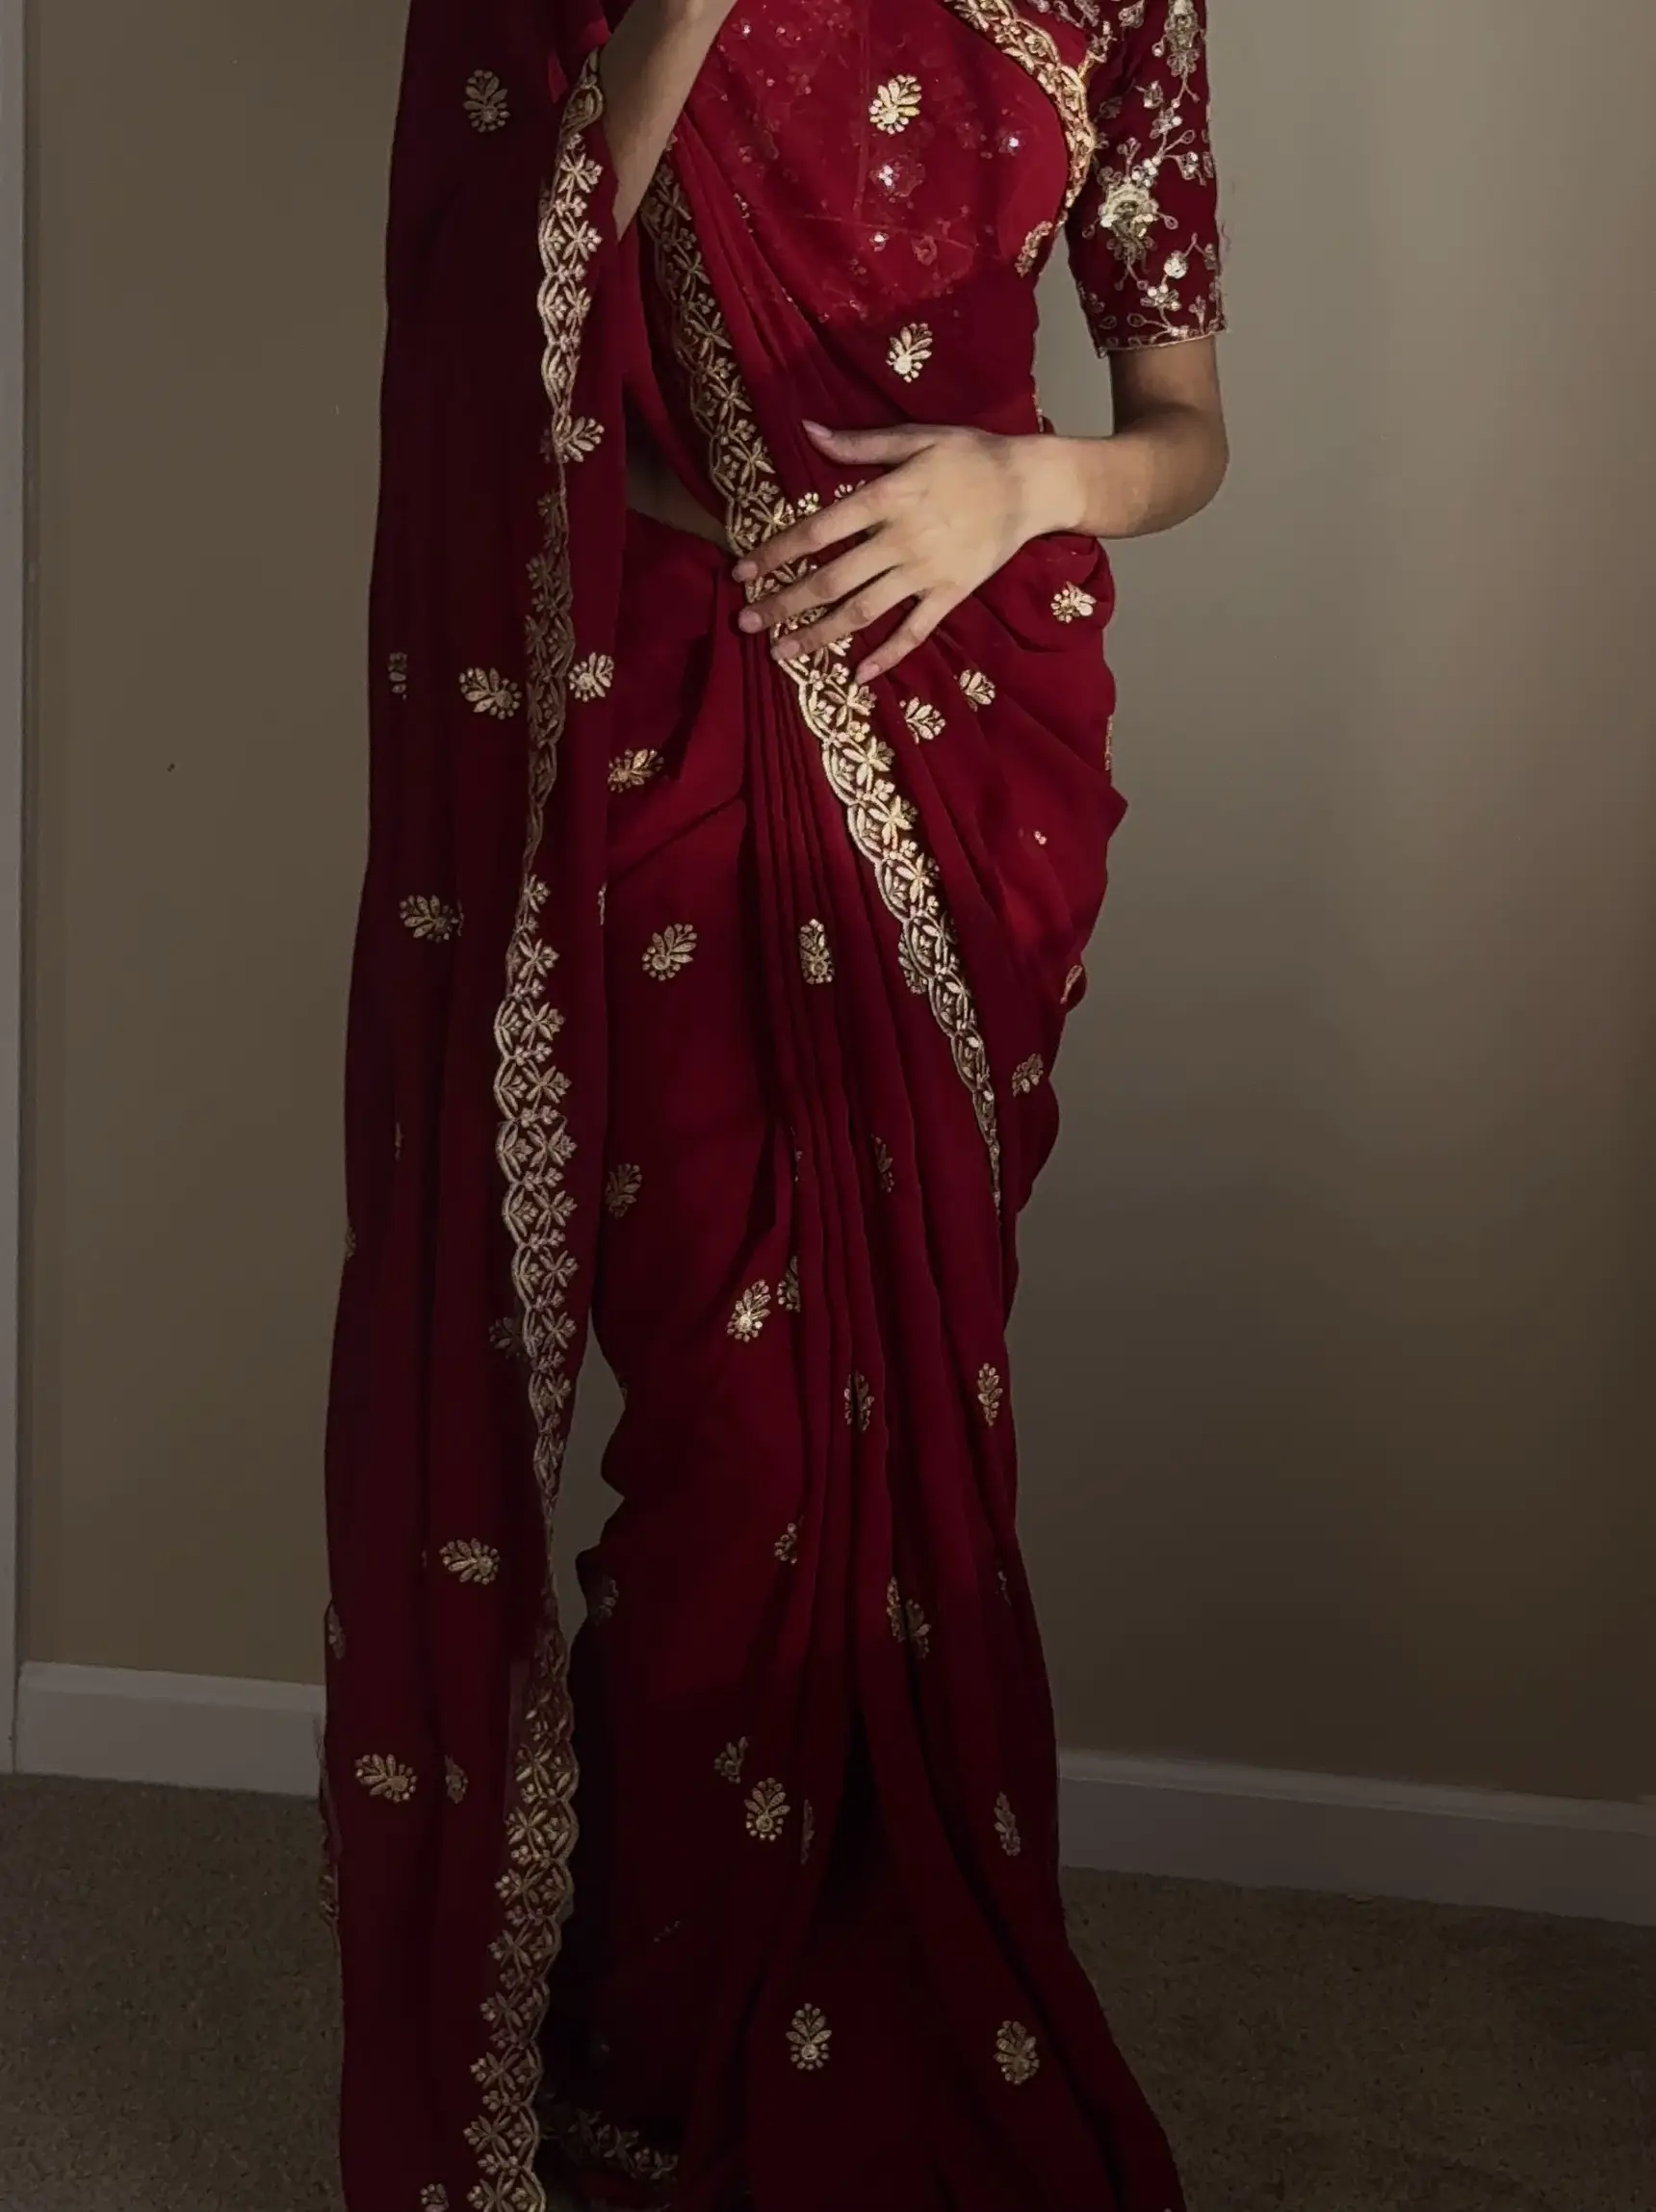 wearing lepord spotted tight saree with sleveless blouse and slim